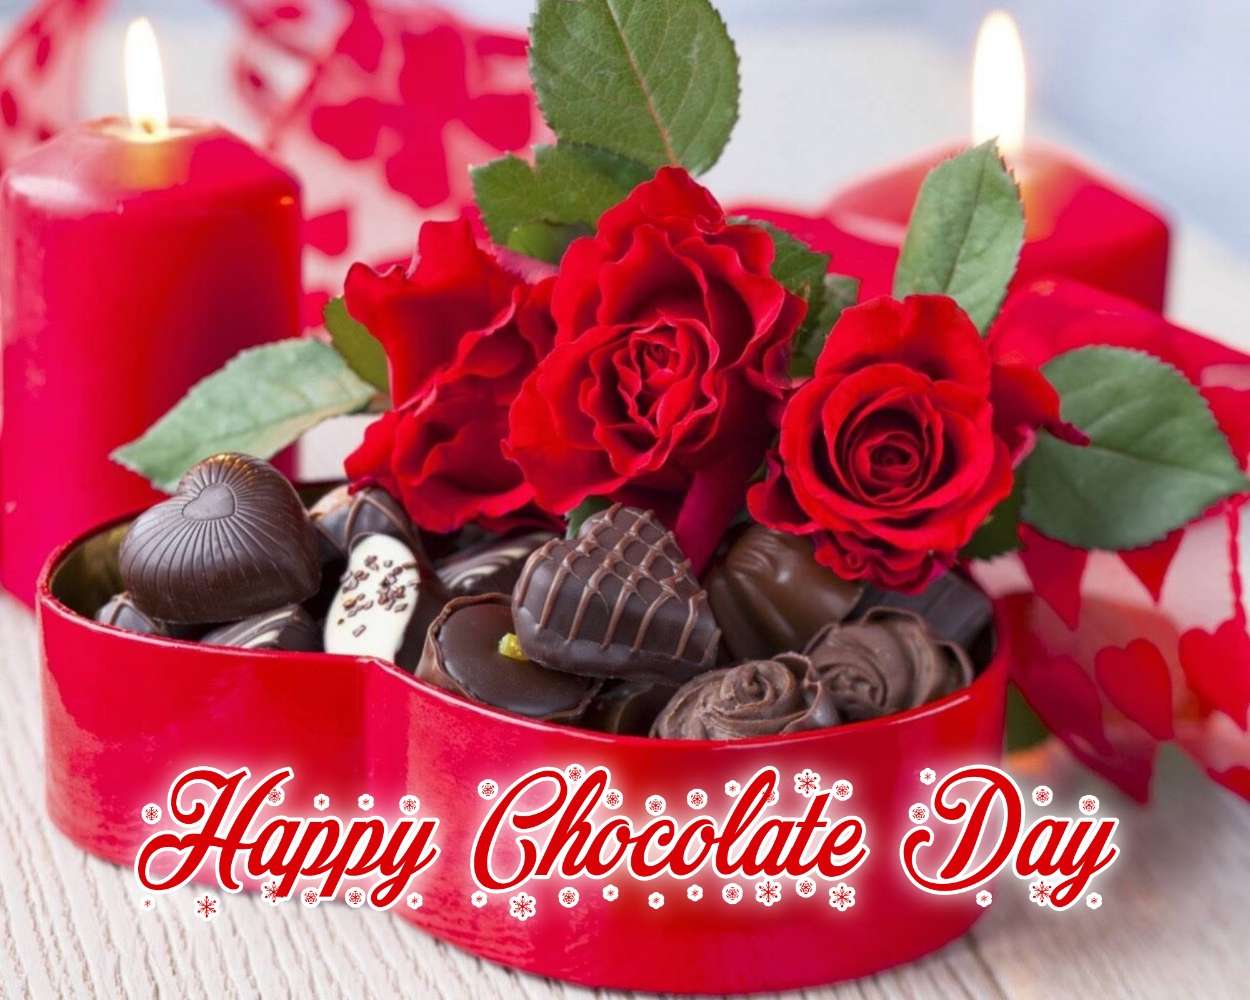 Happy Chocolate Day Images For Love Couple Download - ShayariMaza